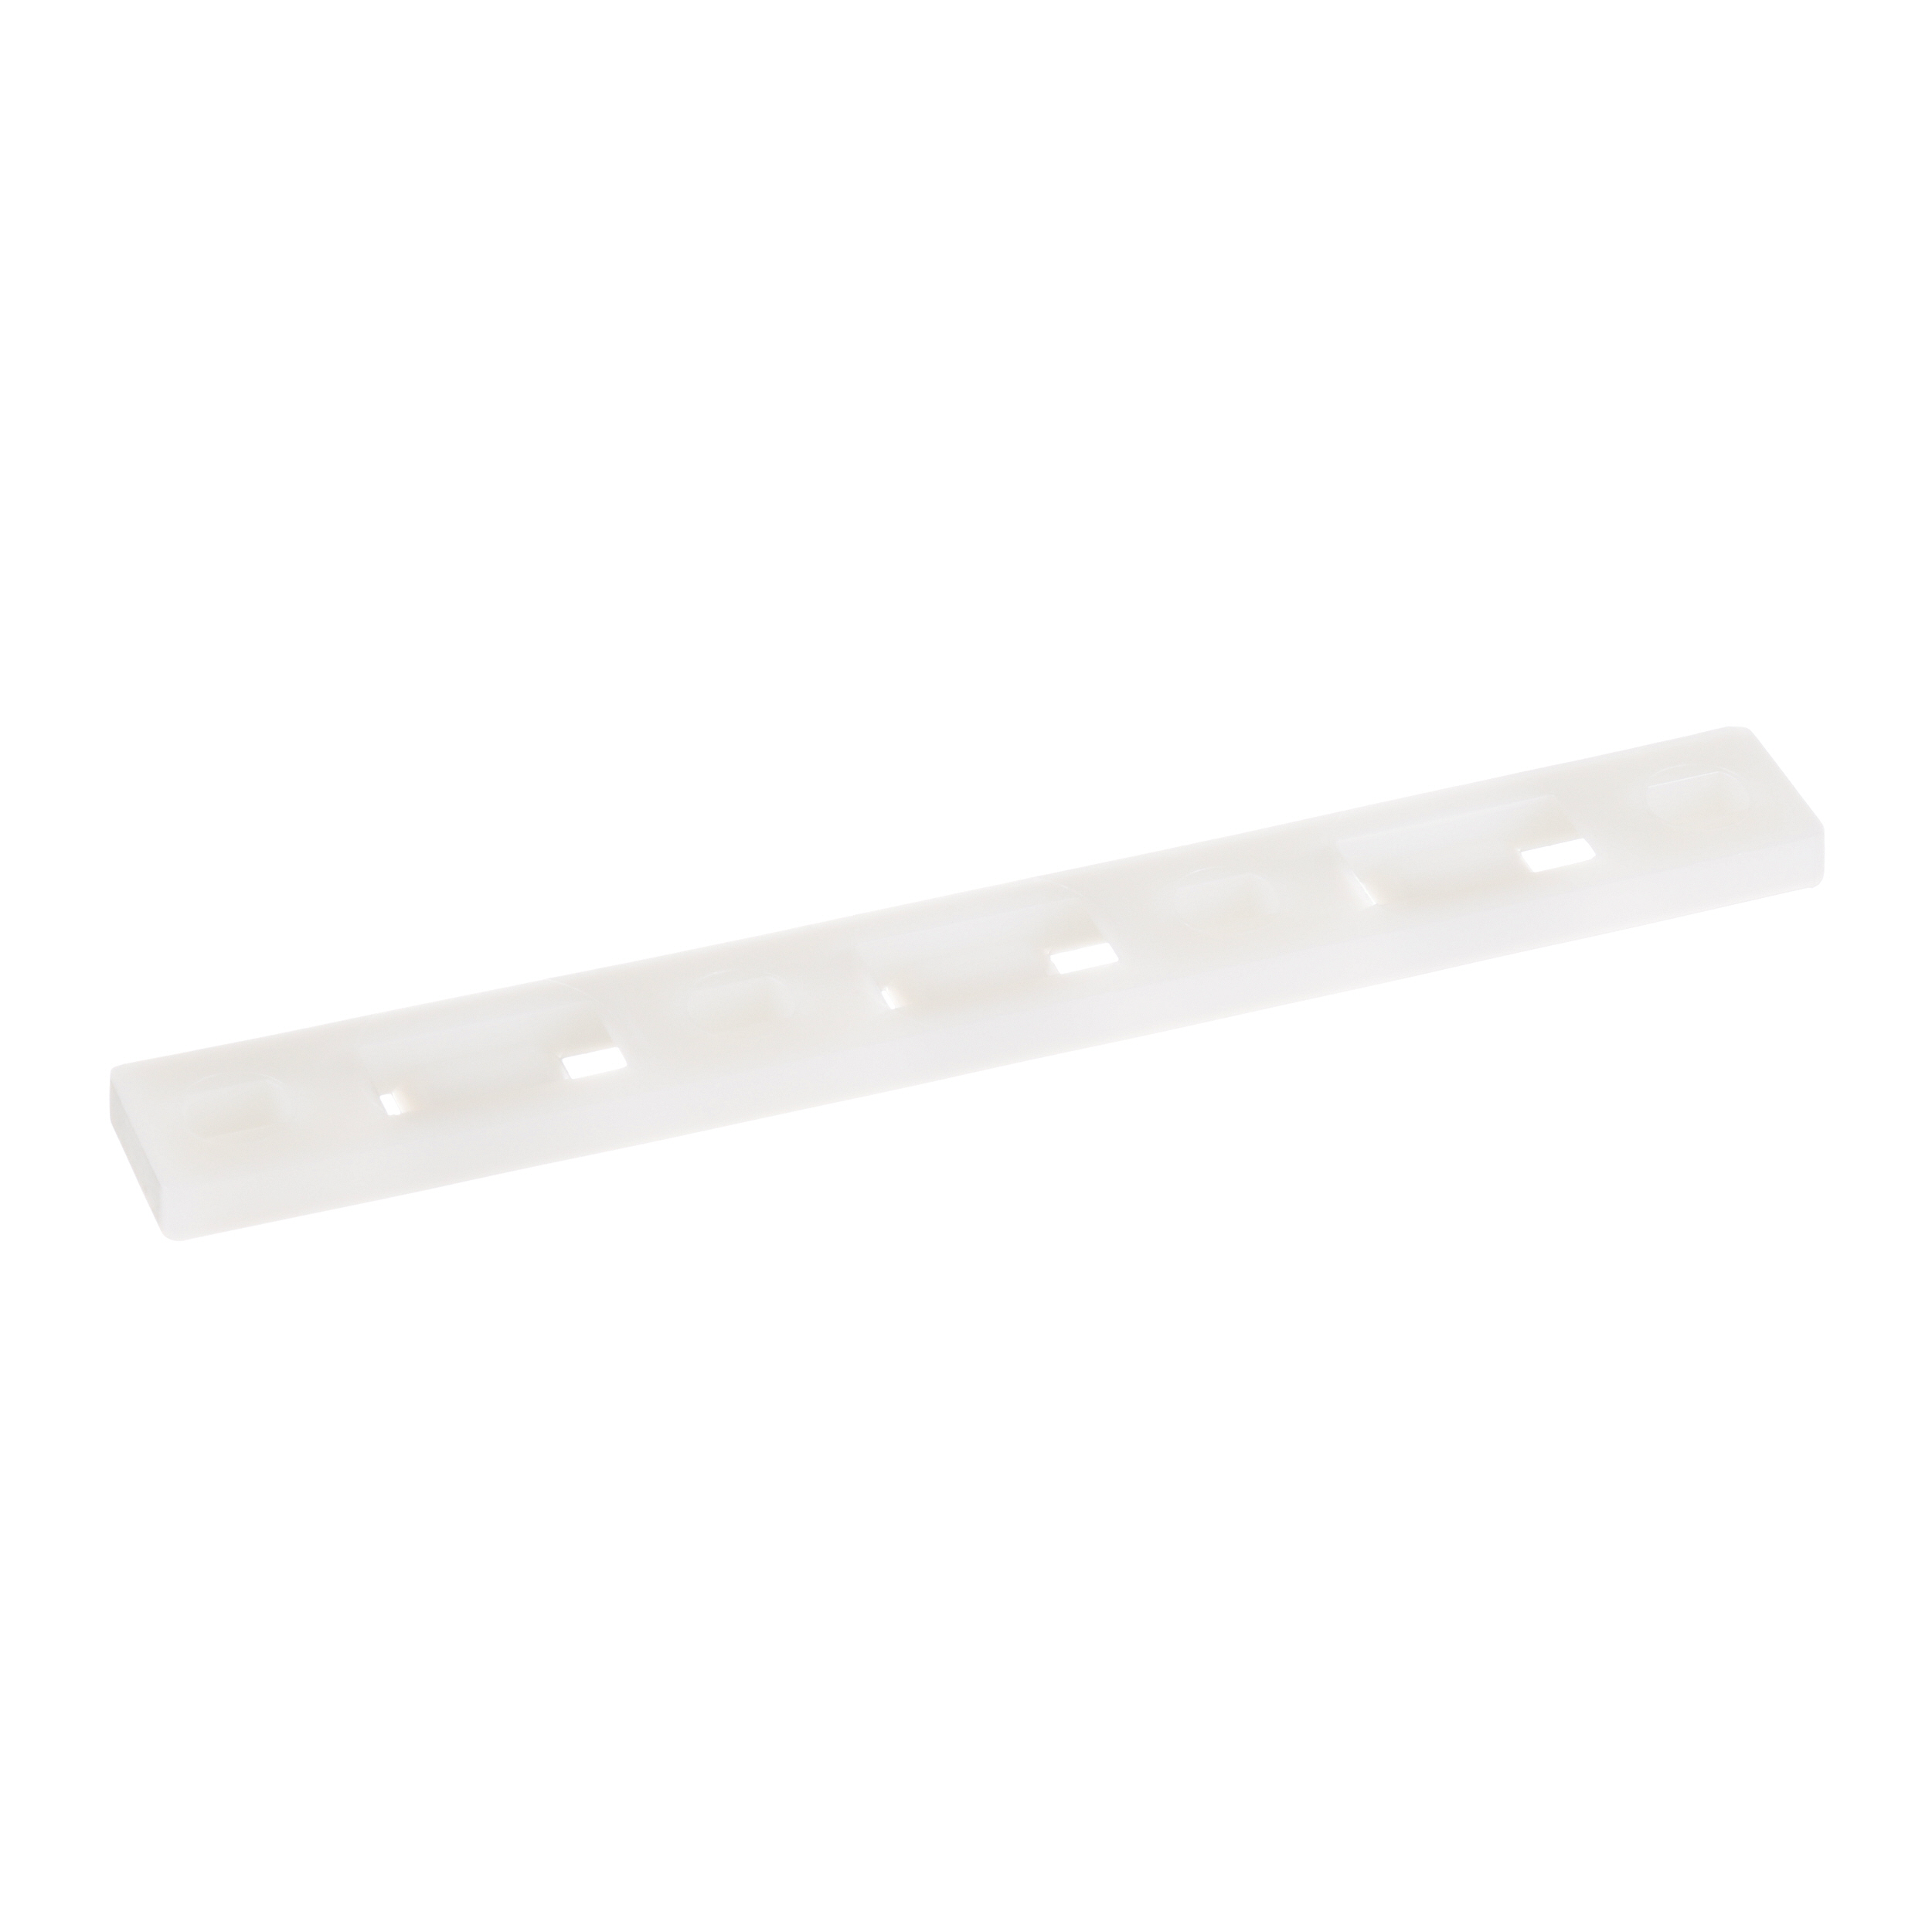 MTP3H-E10-C Tie Plate, Natural, PA 6.6, 5.09x0.62", #10 Screw, PK100